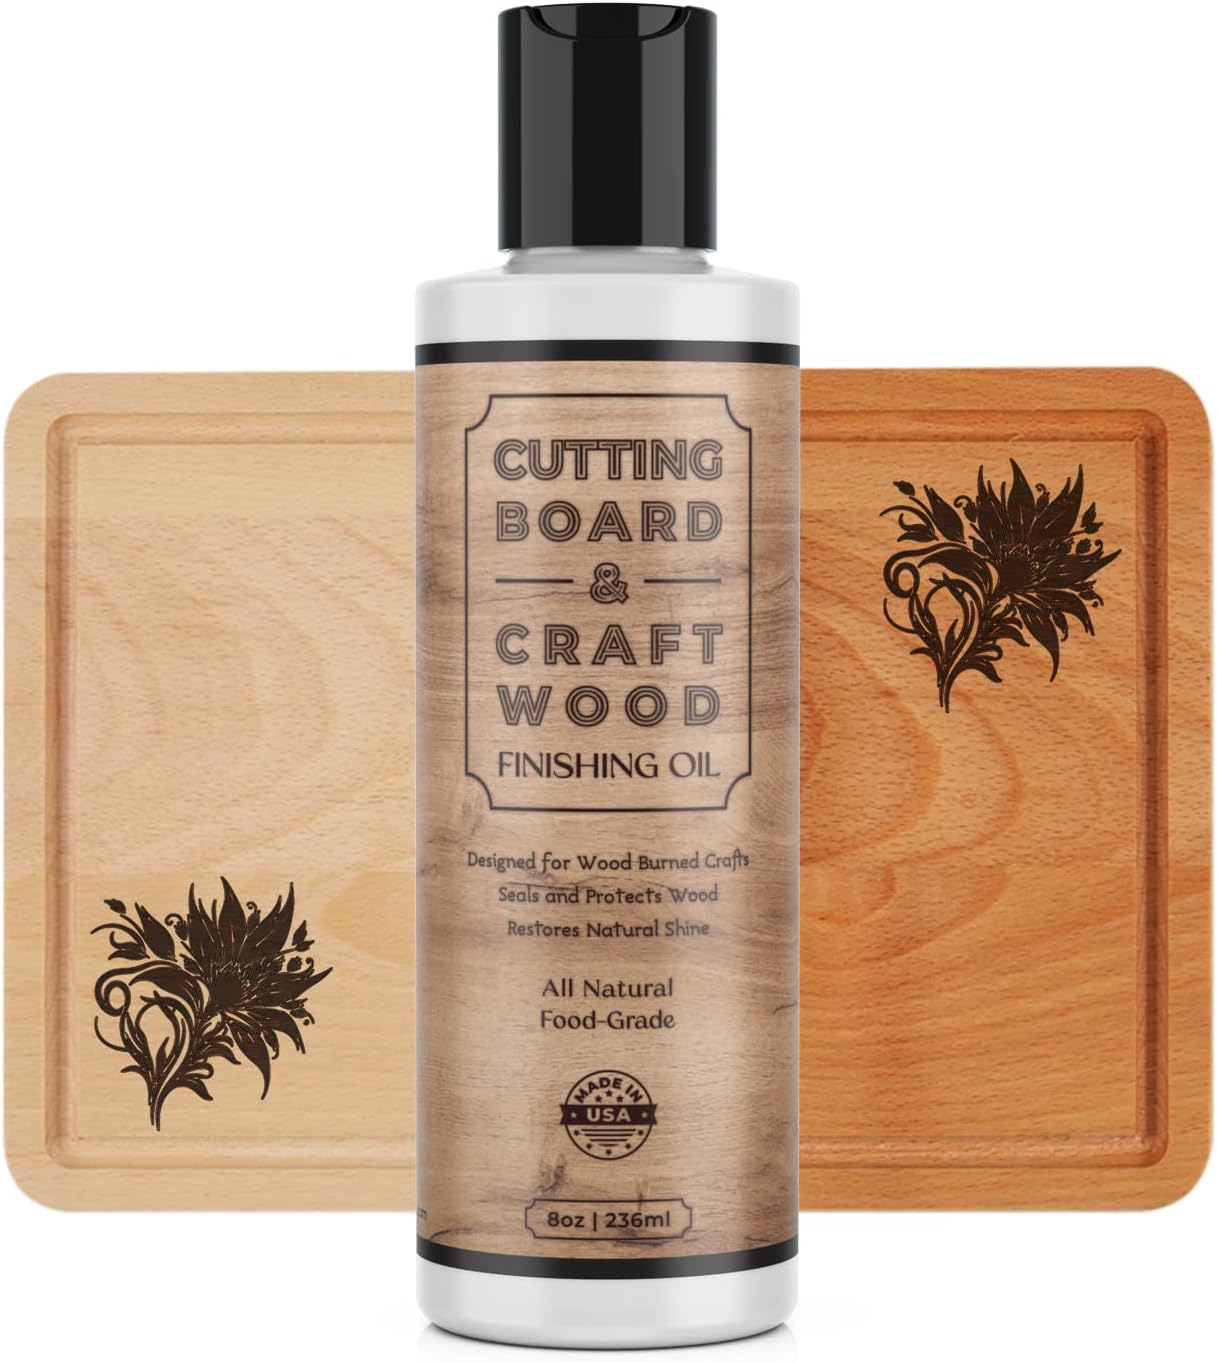 Craft Wood Finishing Oil + Conditioner - 8oz Food-Safe Wood Oil With Citrus Scent - Made in USA - Natural Mineral Oil for Cutting Board, Butcher Block, Kitchen Utensils - Oil + Seal Wood Burned Crafts